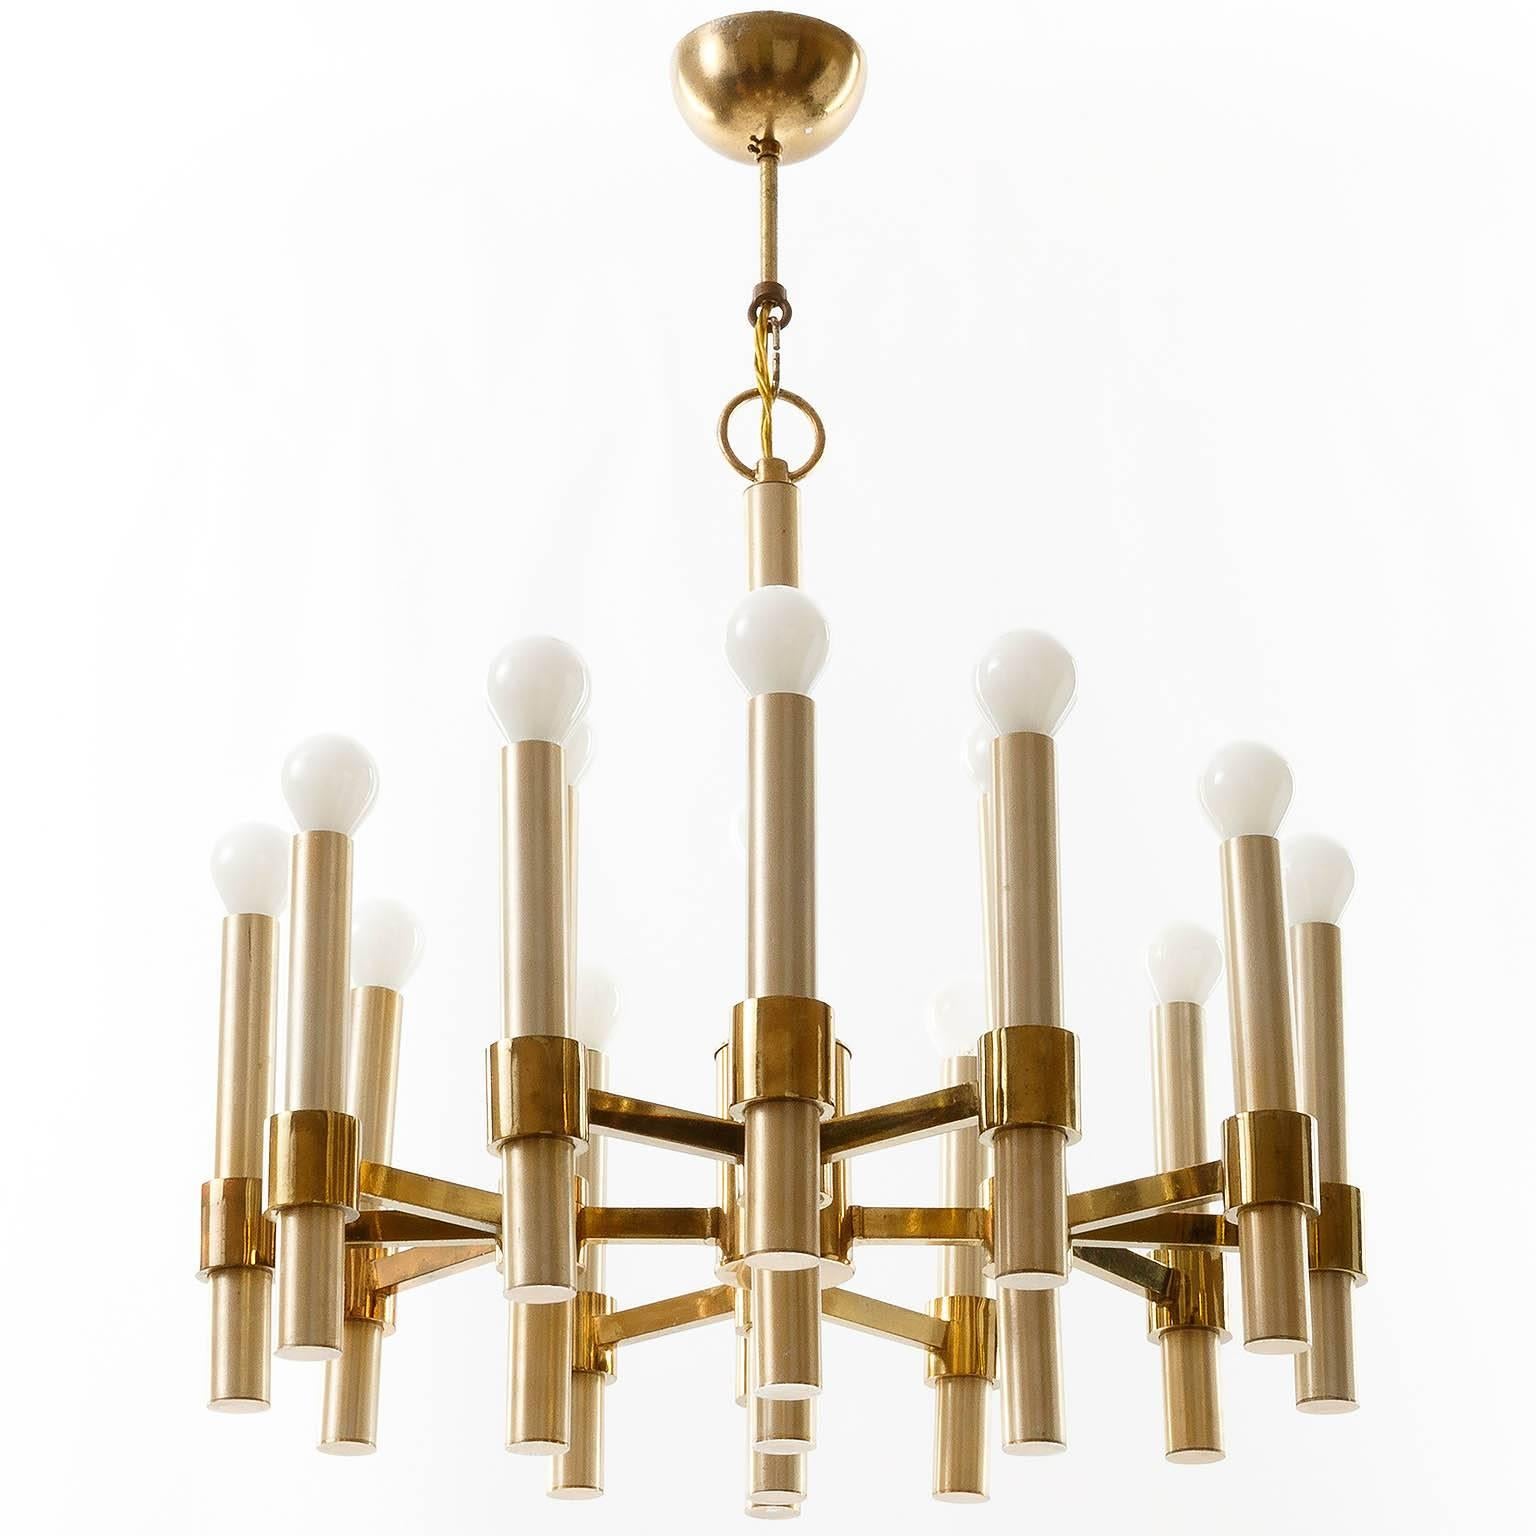 A modernist Italian 16-arm gold-plated brass chandelier by Gaetano Sciolari, manufactured in Mid-Century, circa 1970 (late 1960s or ealry 1970s).
A partly polished and brushed finish. 
16 small base bulbs (max. 40W per bulb). Minor wear on